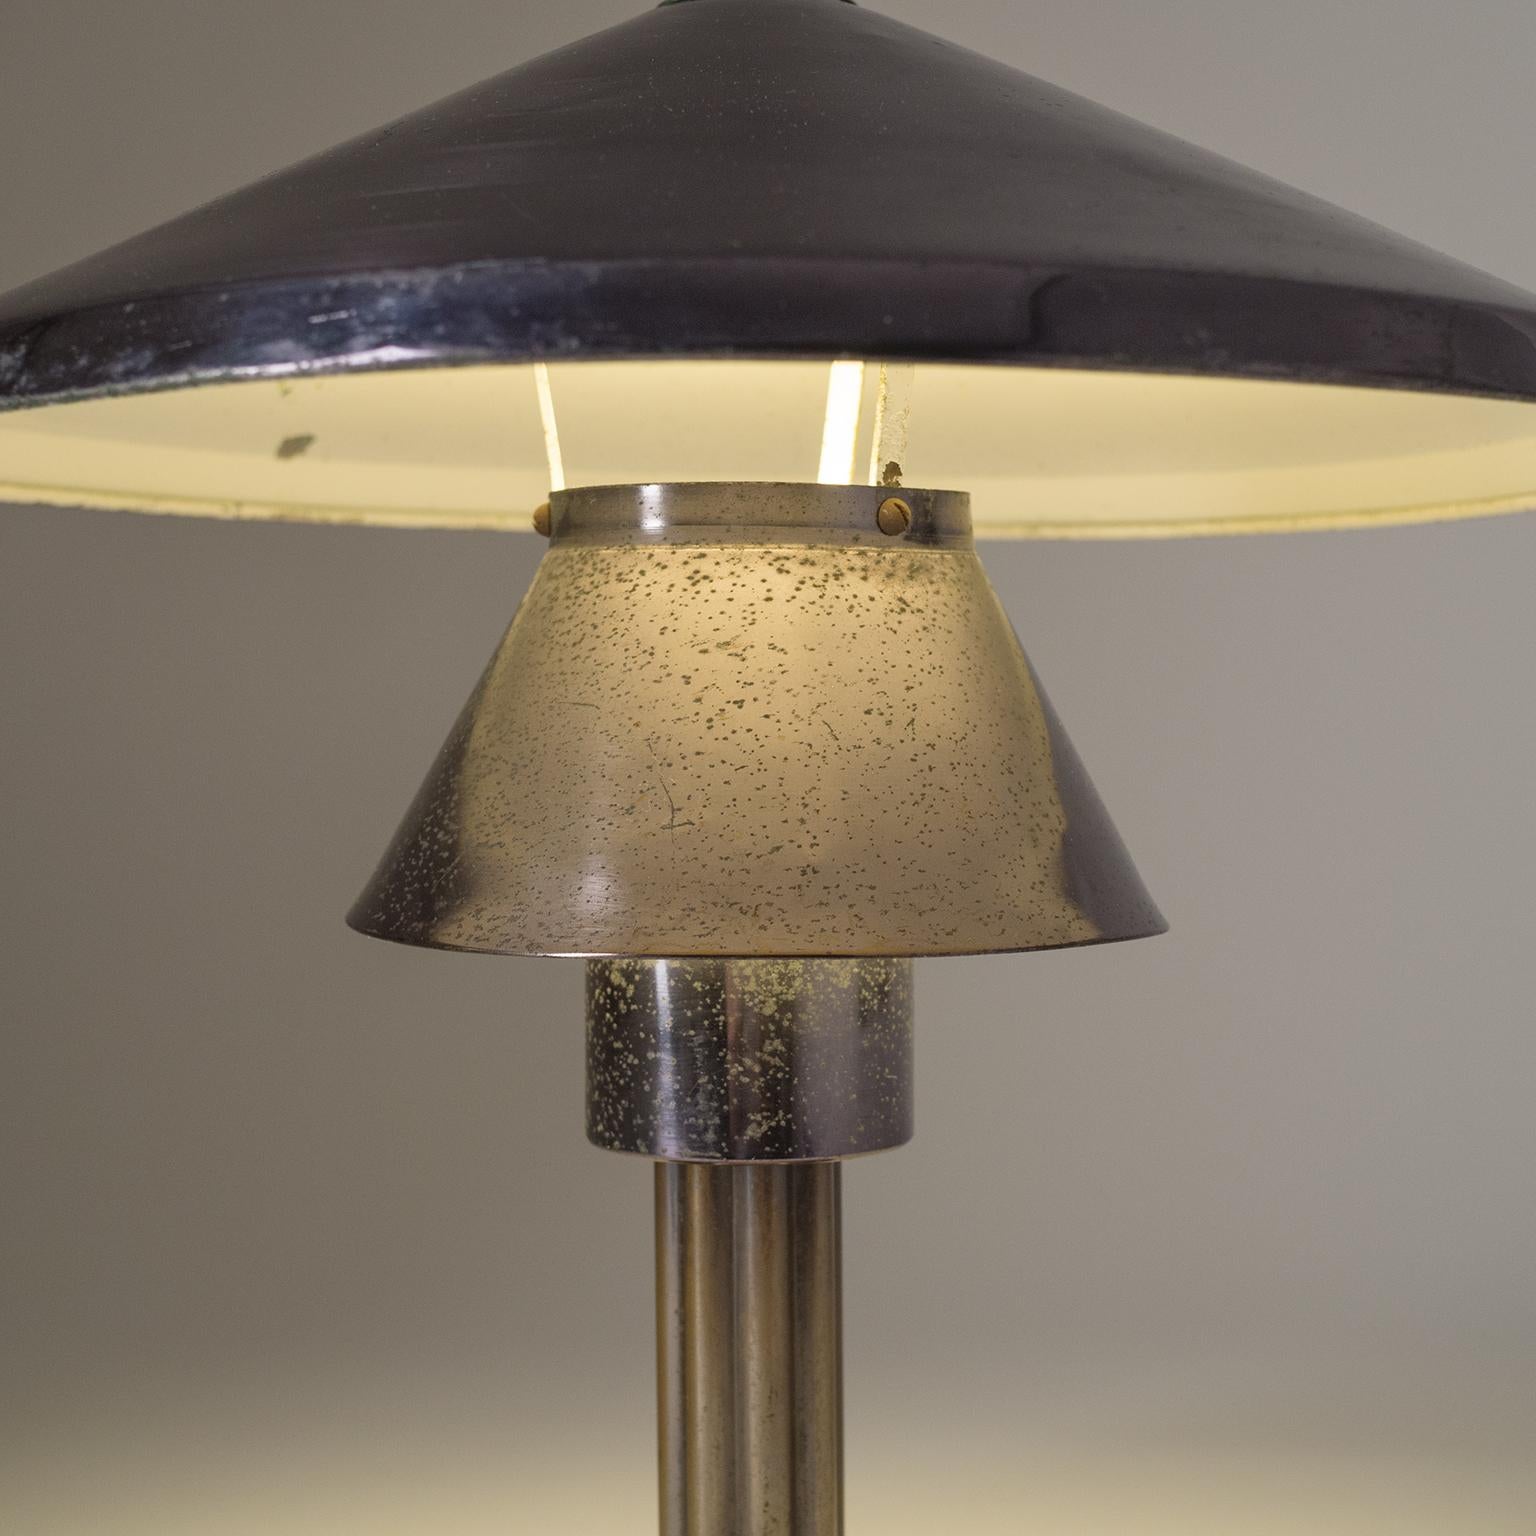 Italian Desk Lamp, 1950s, Patinated Nickel In Fair Condition For Sale In Vienna, AT